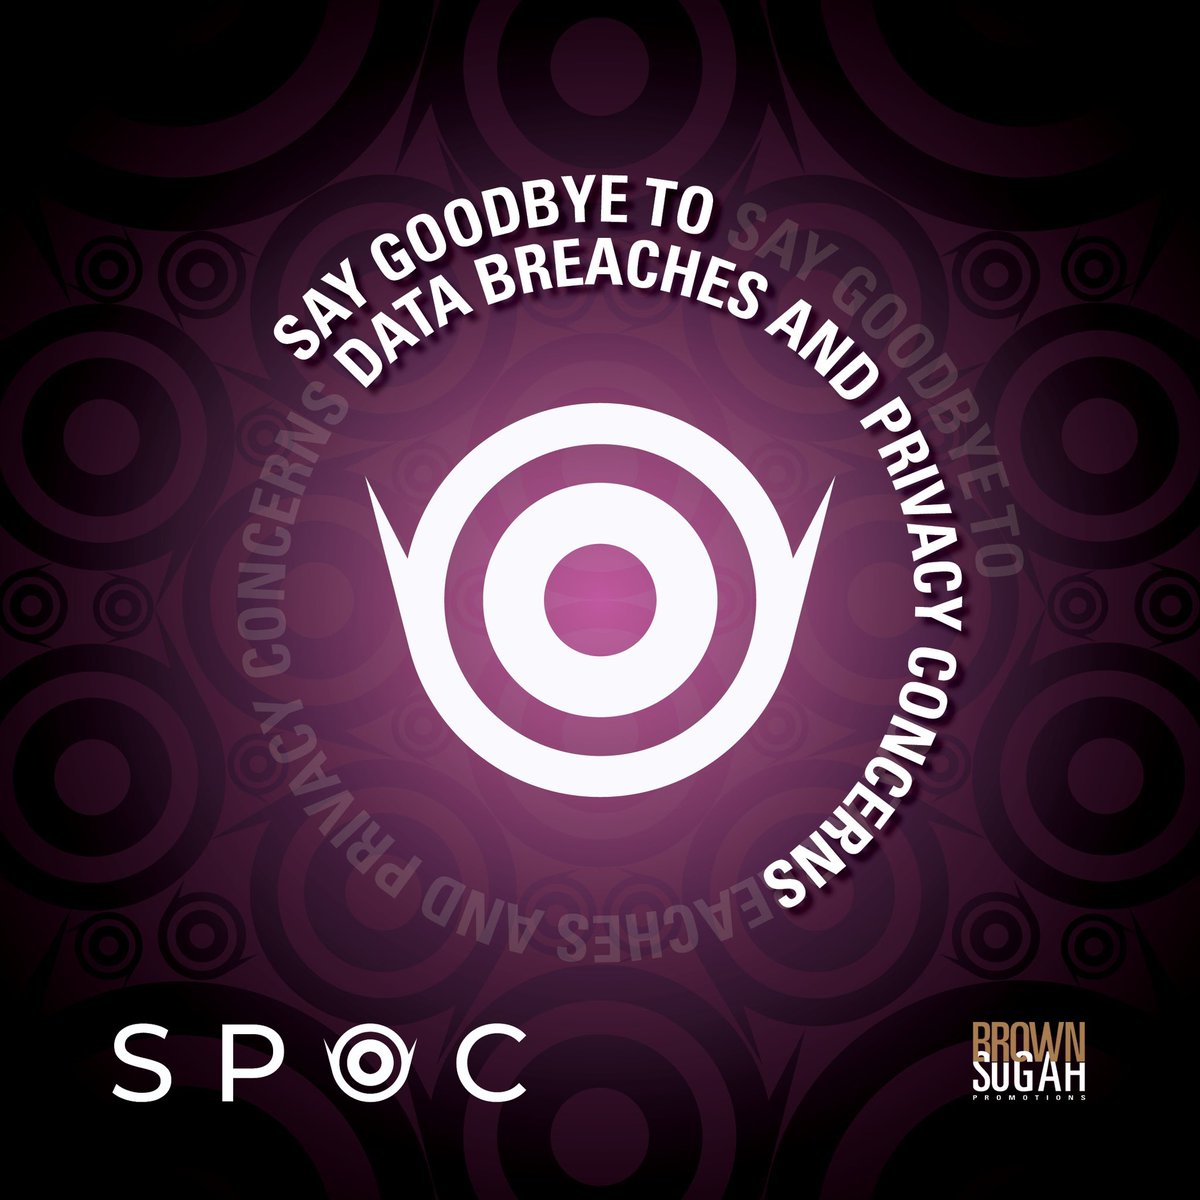 Experience secure & private storage and sharing of your personal data with SPOC! @SPOCme The Next Generation in Data! #data #databreach #blockchain #privacy #dataprivacy #cybersecurity #technology #crmsoftware #Web3 #NFTs #ecommerce #SPOC🖖